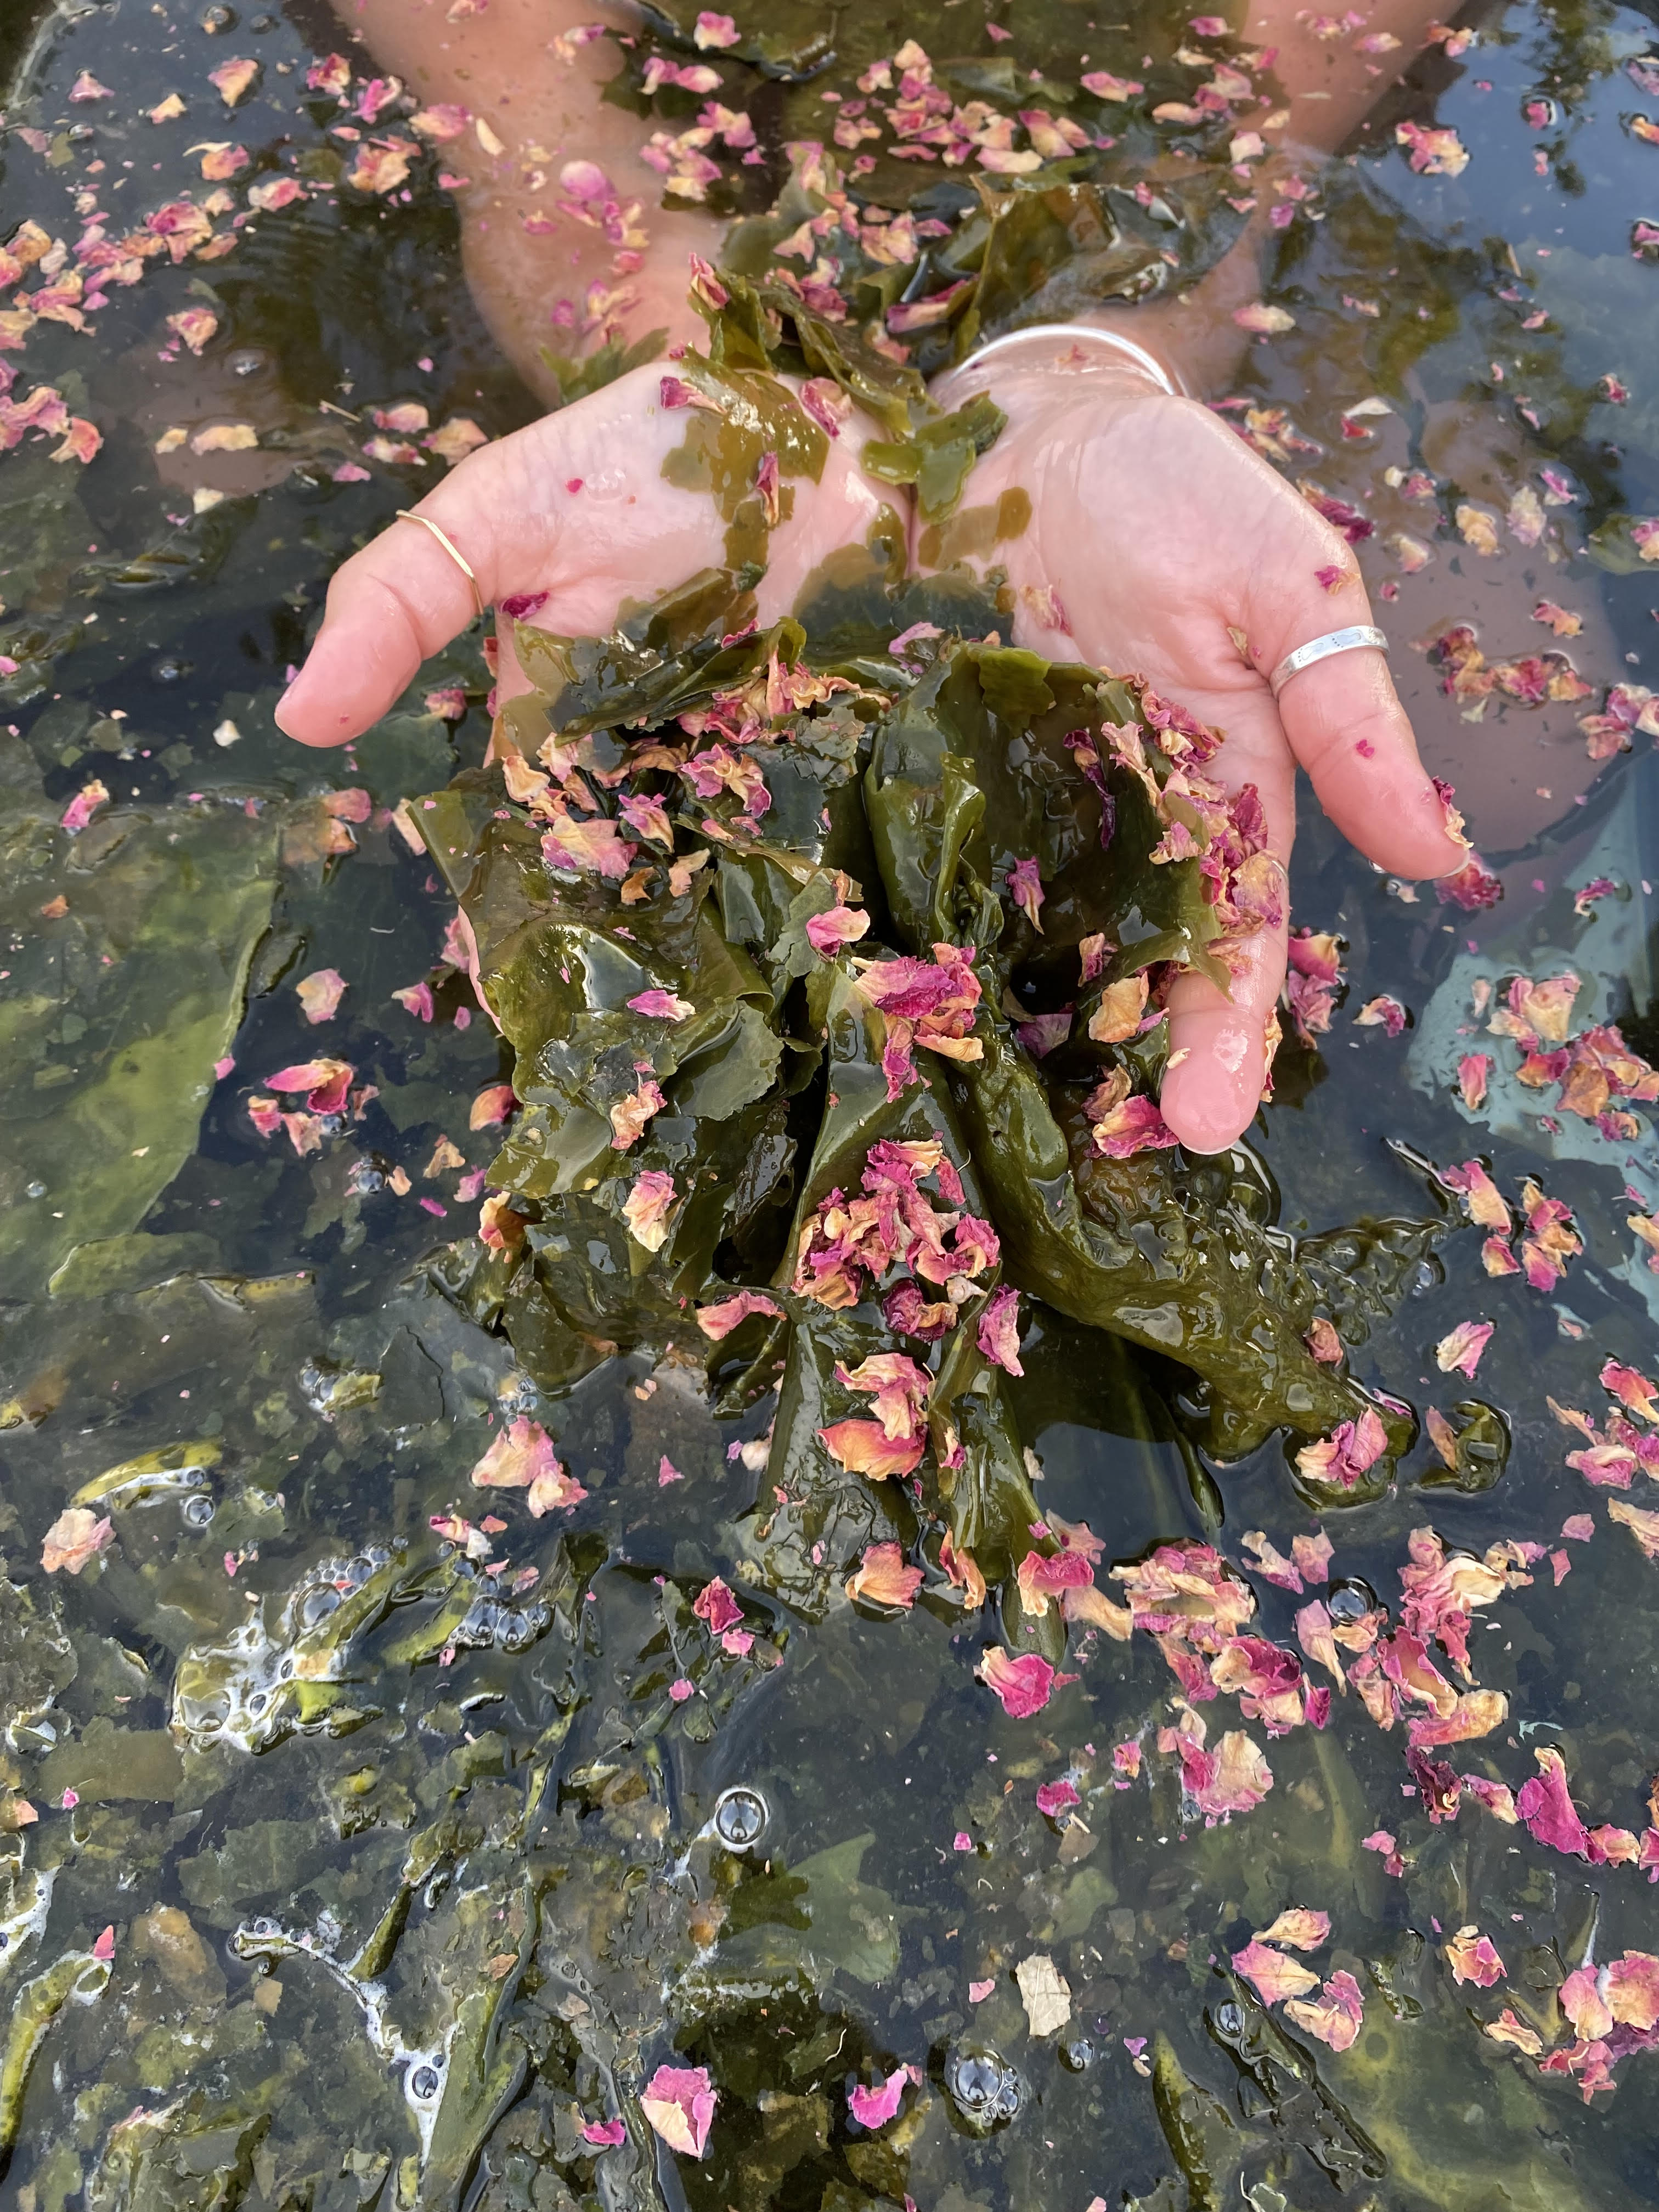 Hands holding ocean farmed seaweed and rose petals in an outdoor bath tub. Eco-friendly bathing product.